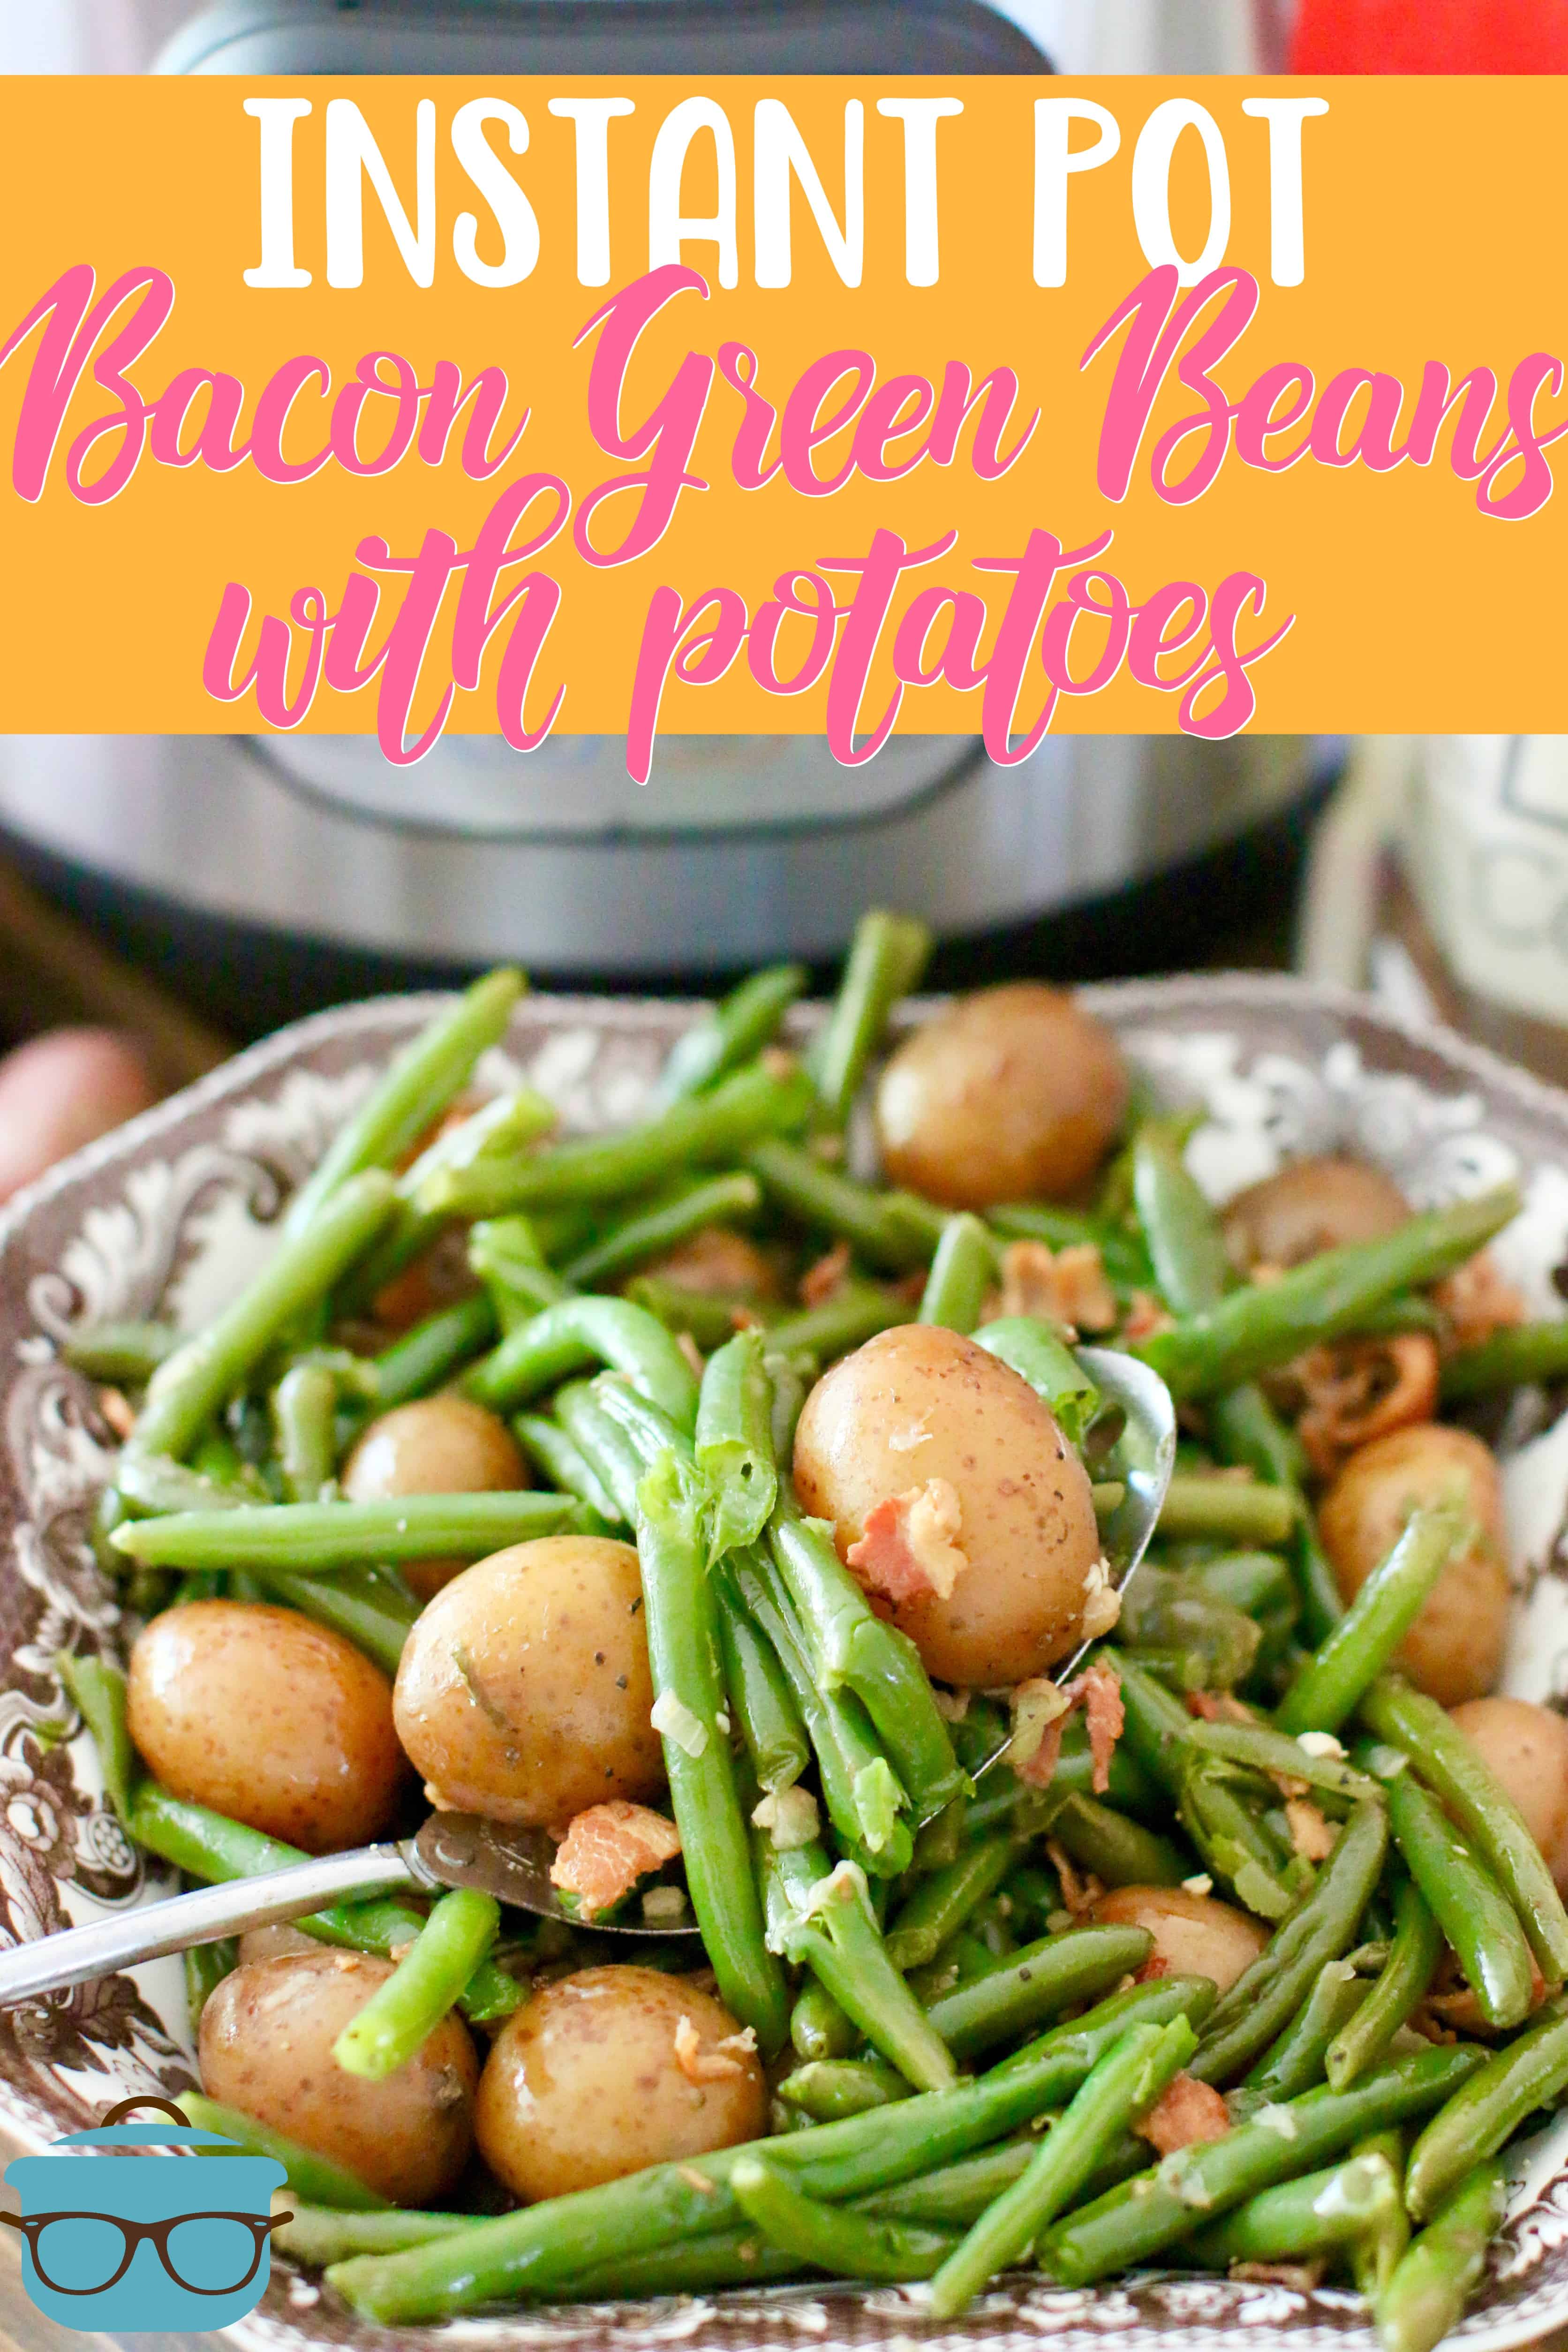 Instant Pot Bacon Green Beans With Potatoes The Country Cook,When Is Strawberry Season Over